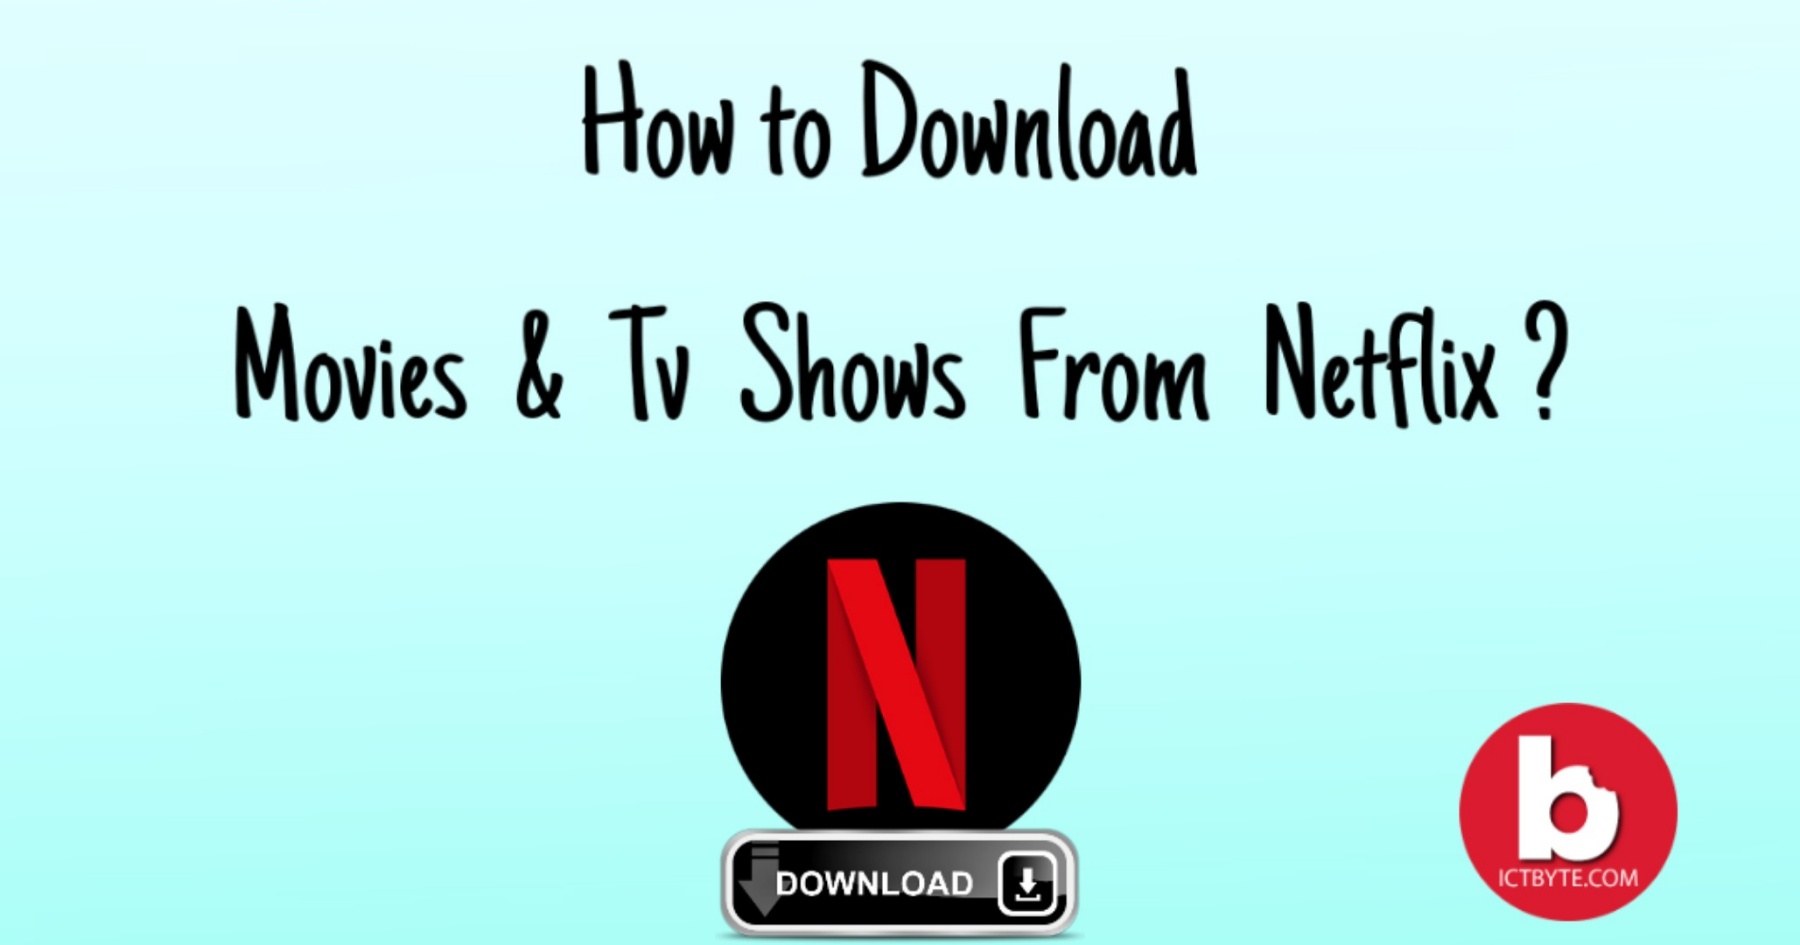 download from Netflix how to